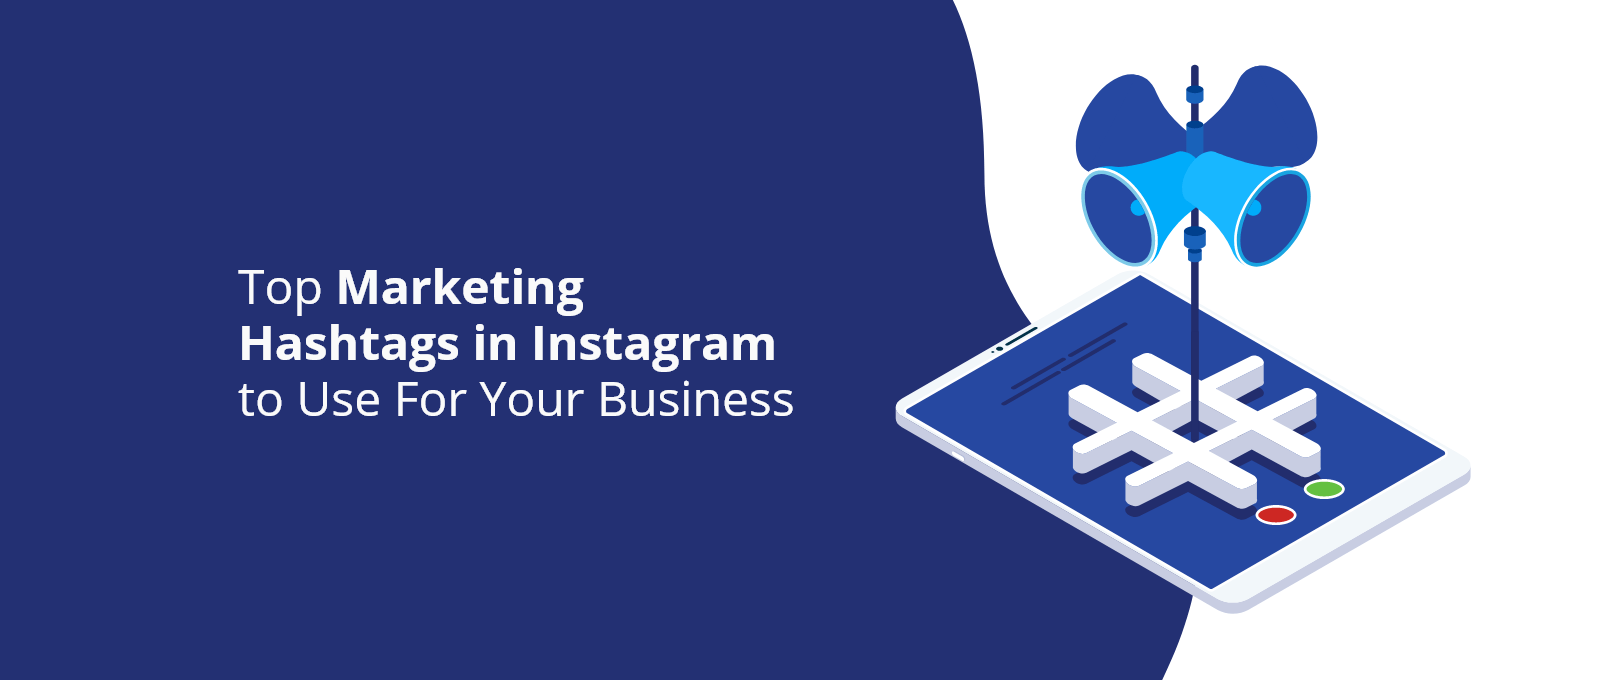 Top Marketing Hashtags in Instagram to Use for Your Business - DevriX